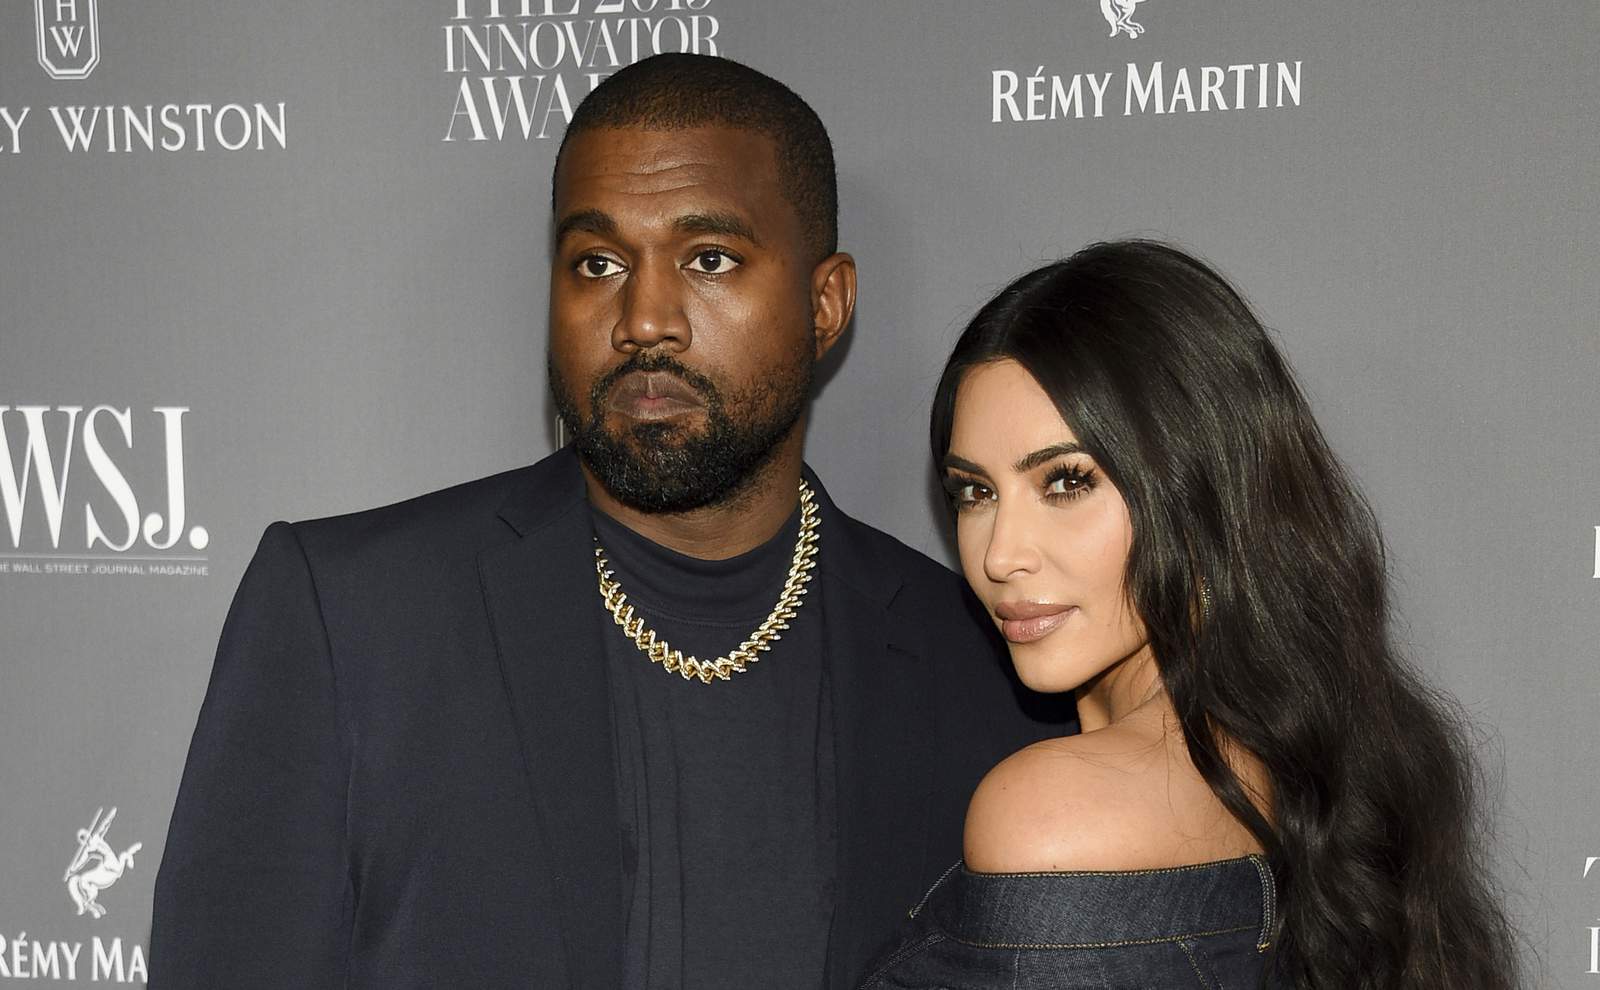 As 'Kimye' become Kim and Kanye, will it stay peaceful?